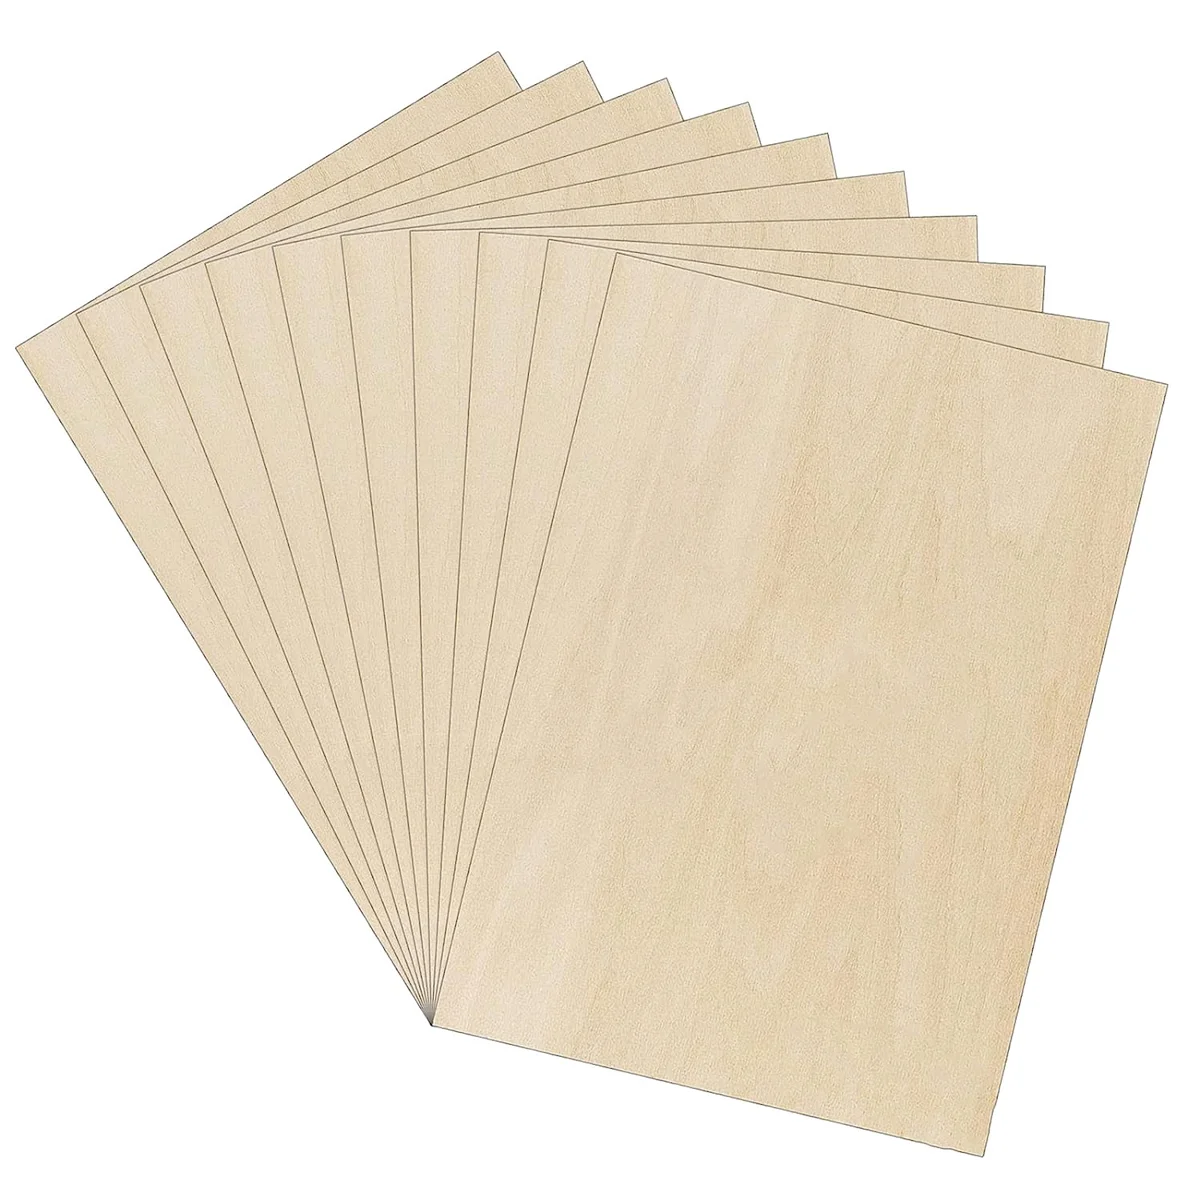 10-x-plywood-panels-a3-wooden-panel-fretsaw-wood-for-diy-woodworking-laser-processing-model-making400-x-300-x-2-mm